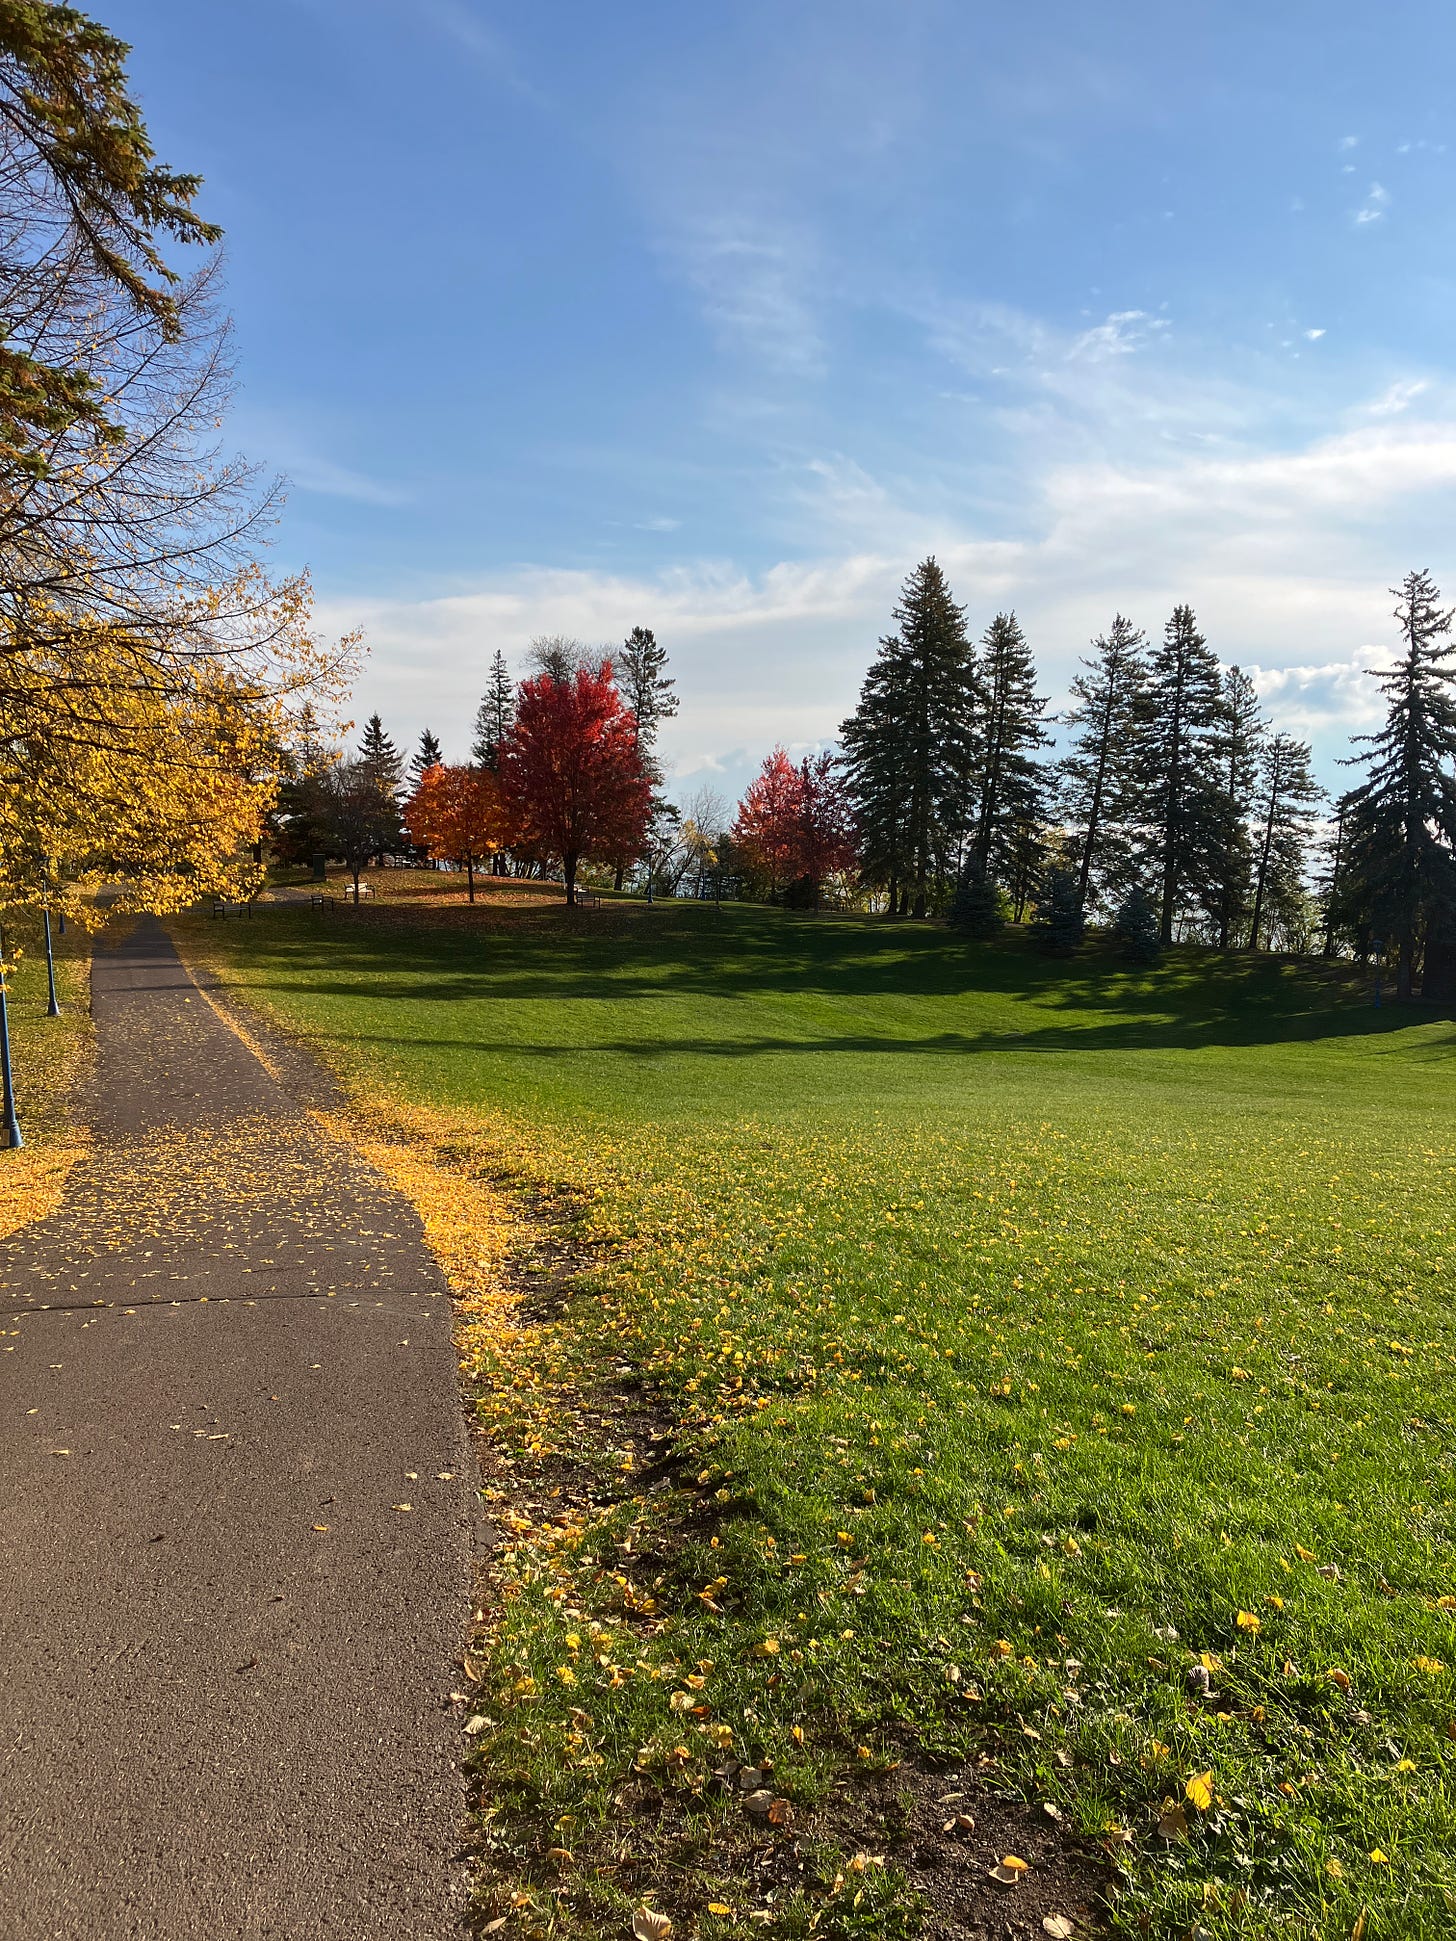 A sunny day with a blue sky. A paved path along a wide grassy field dotted with pines and some maple trees that have changed into fall colors.